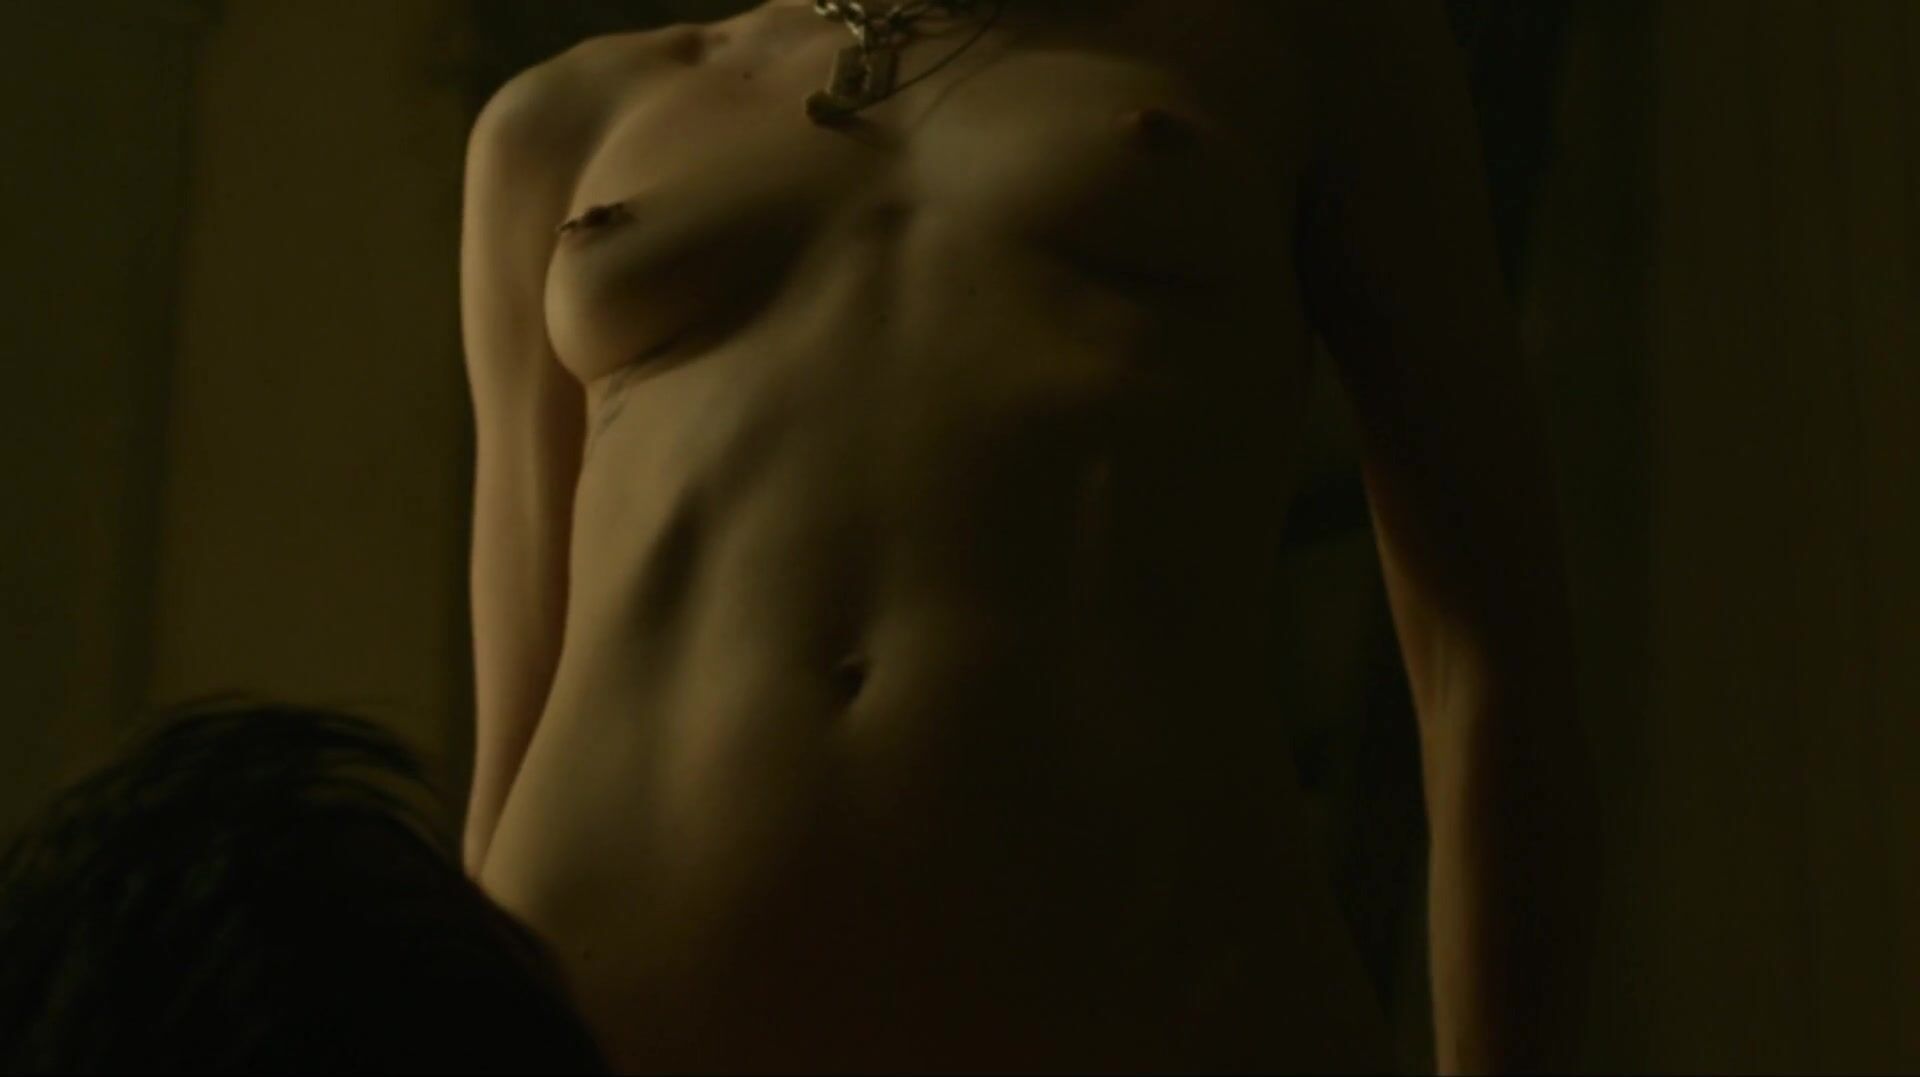 Hairypussy Men hump Rooney Mara with her consent or without it in Girl With The Dragon Tattoo Chica